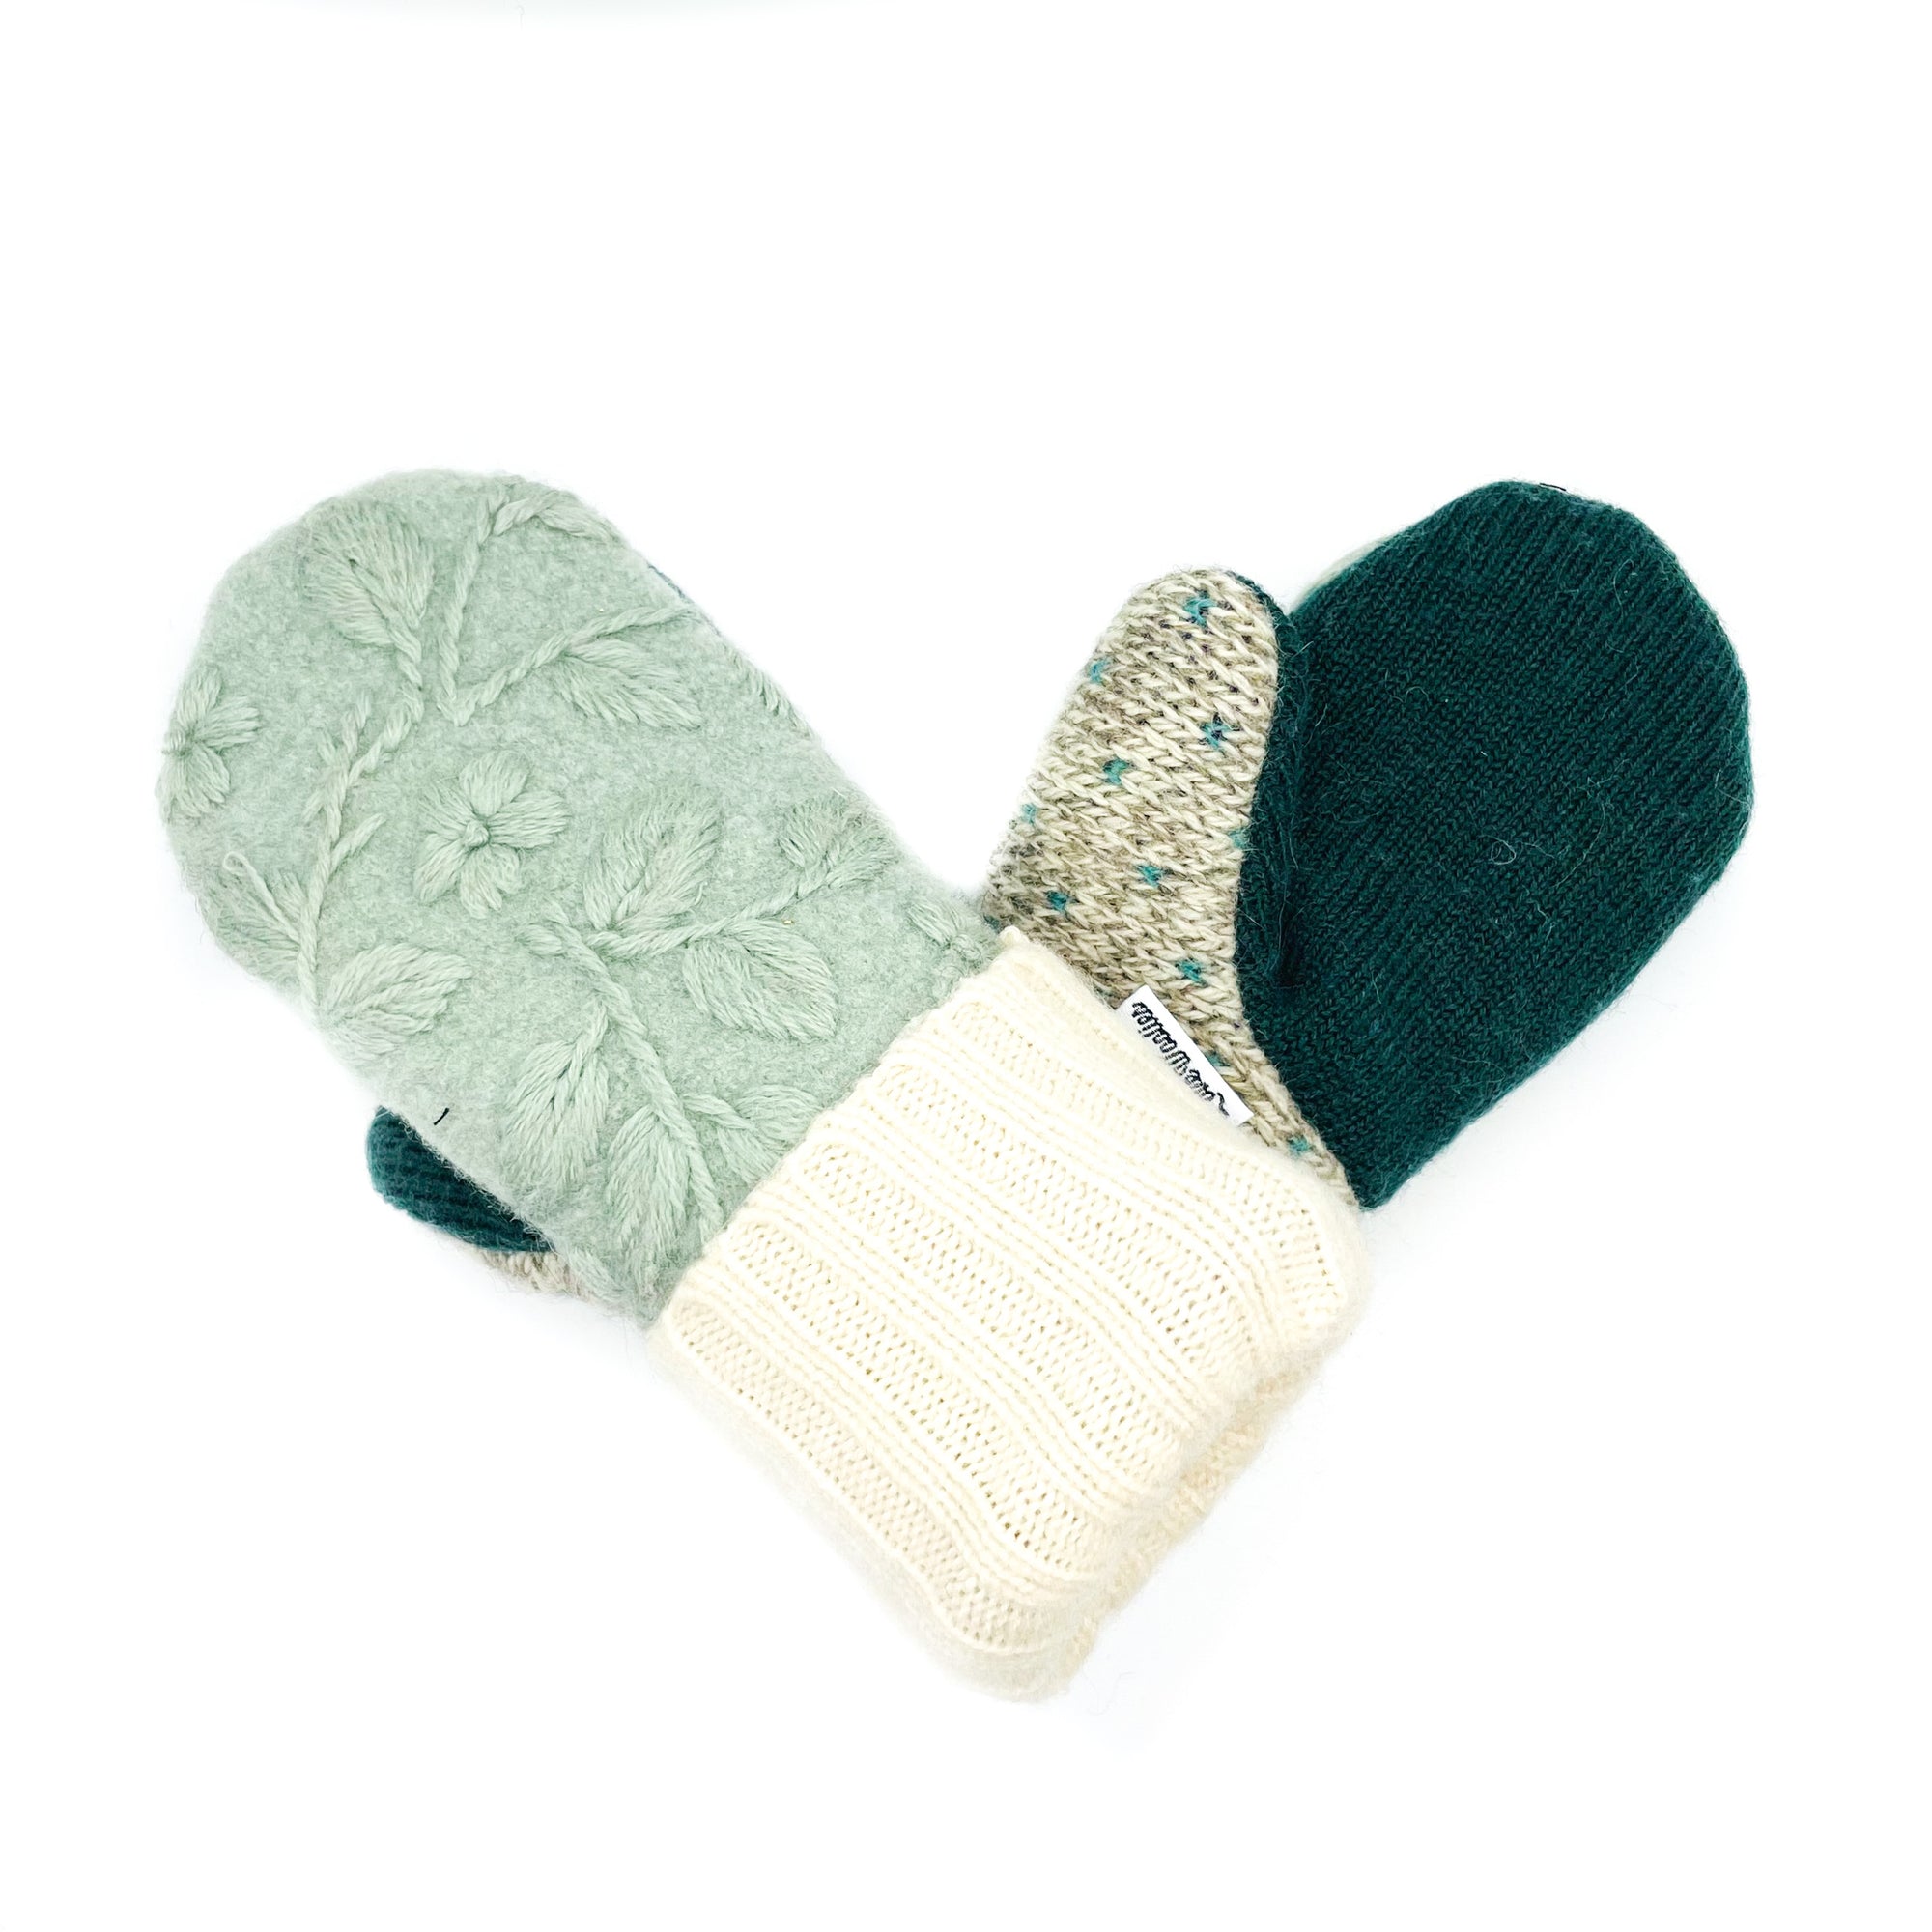 Large Kid's Wool Sweater Mittens | Heavenly Hands